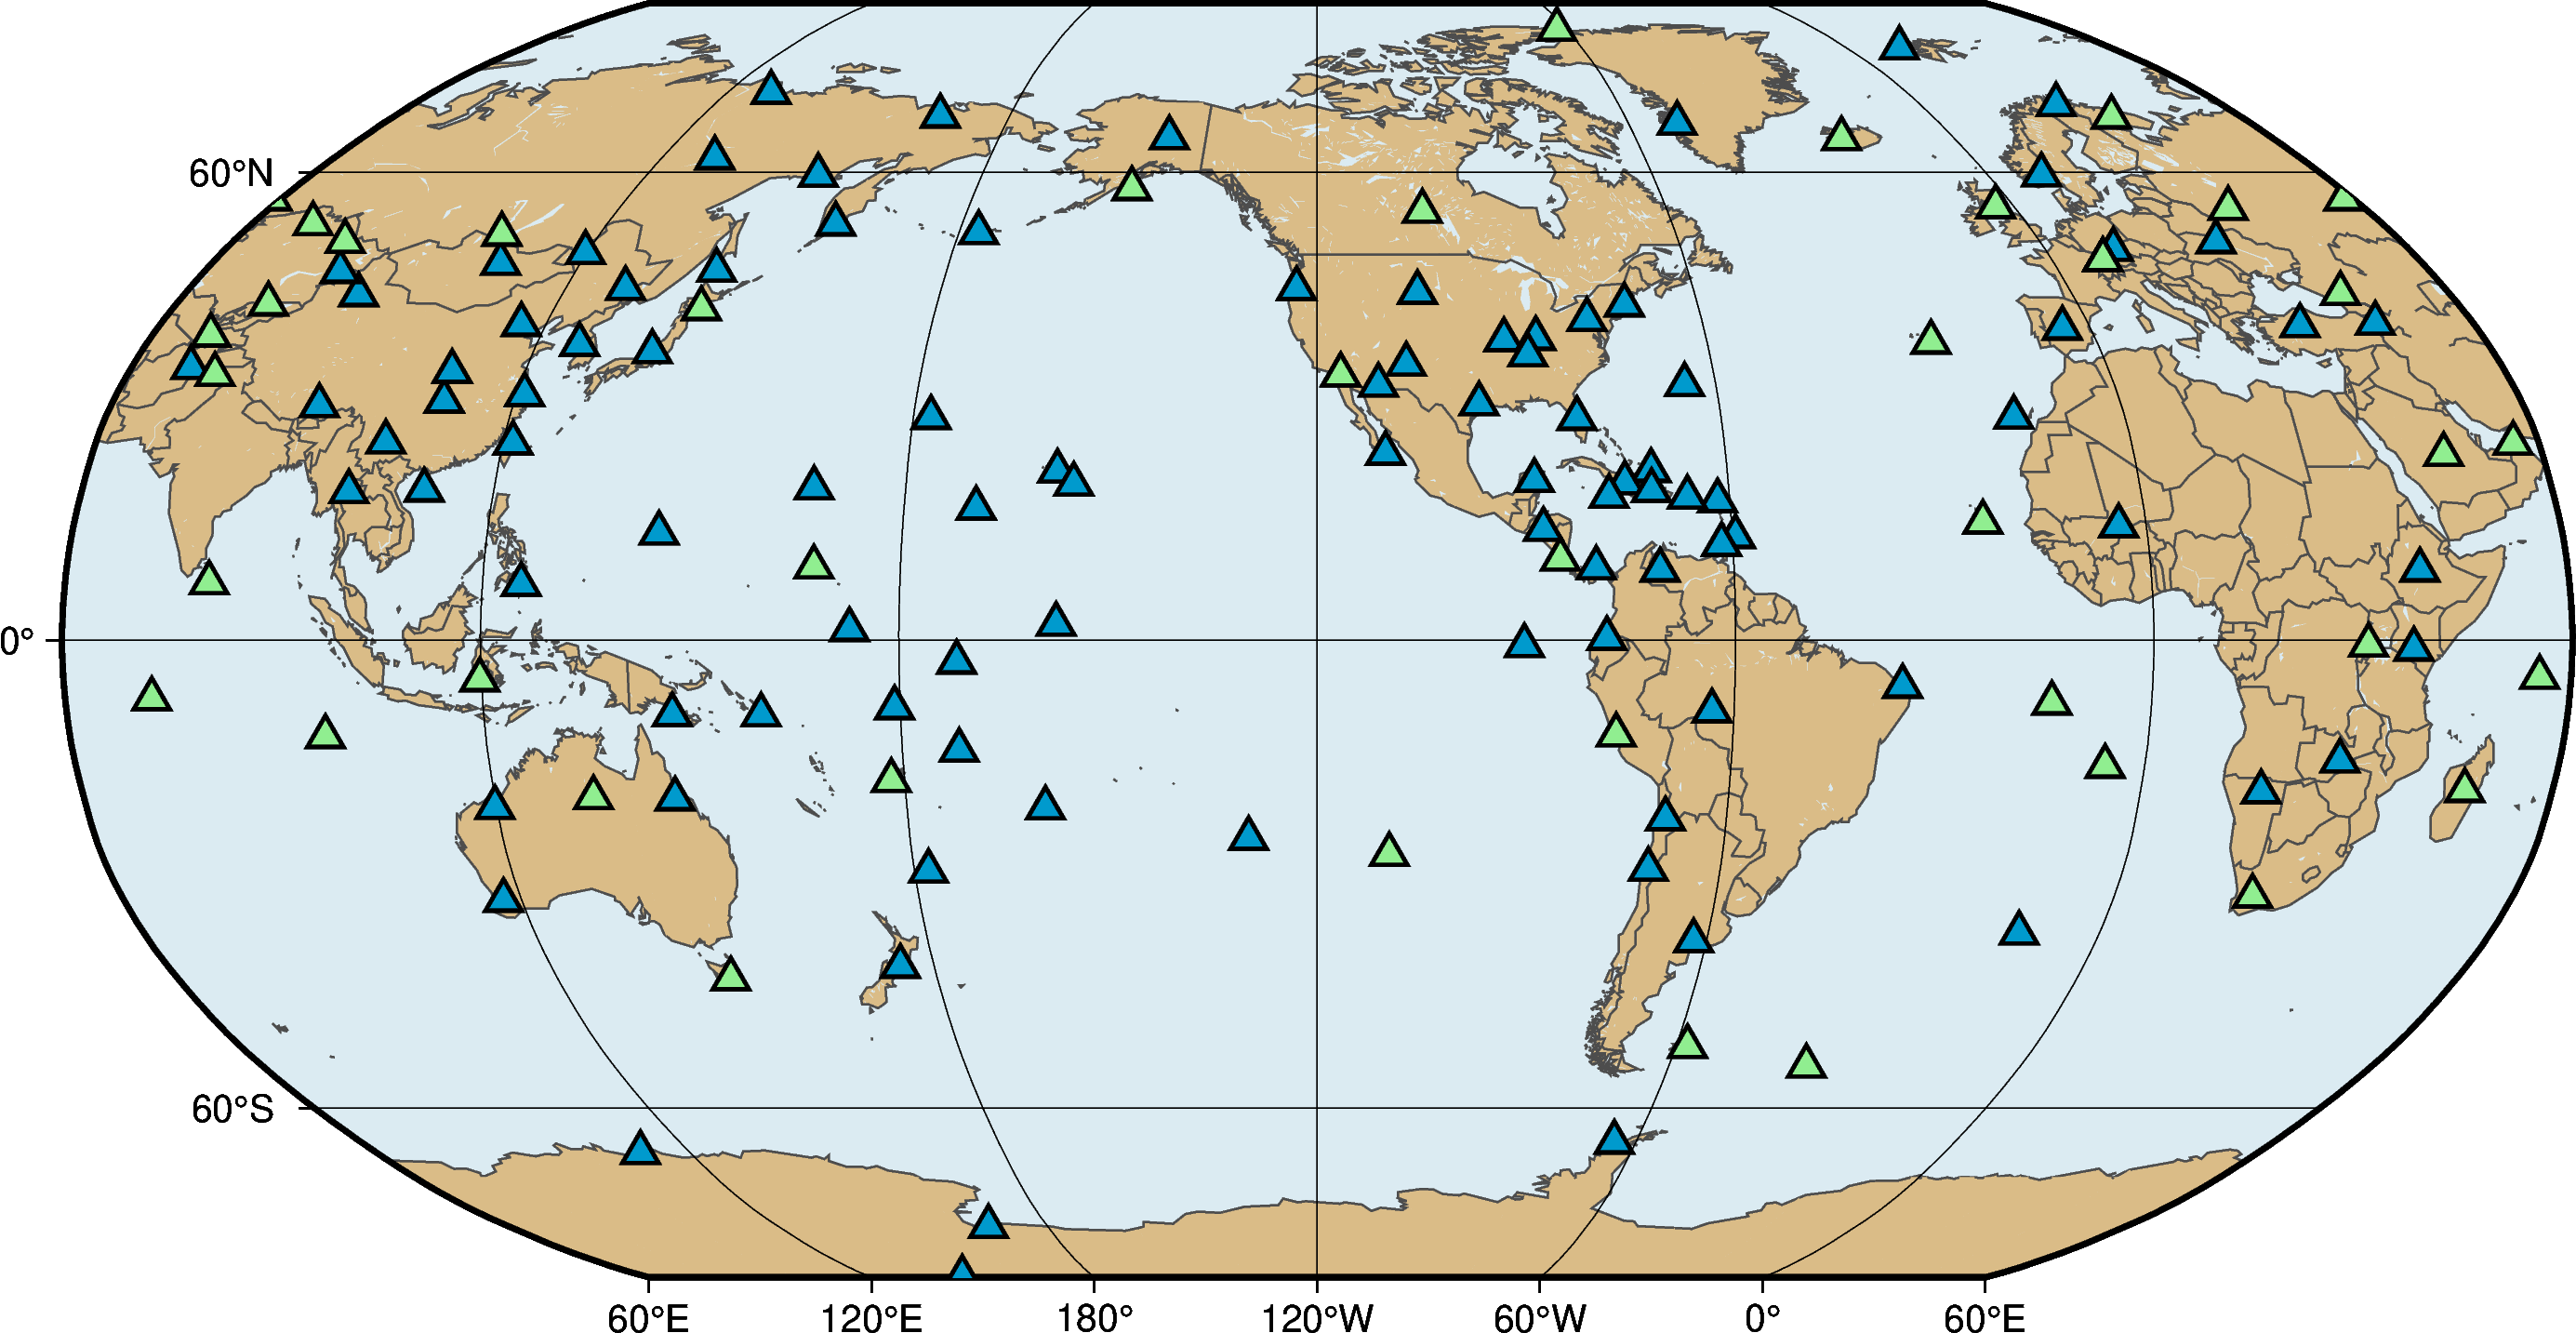 Distribution of Global Seismographic Network (GSN) stations. USGS GSN sites are shown in blue and IRIS/IDA stations are shown in green.